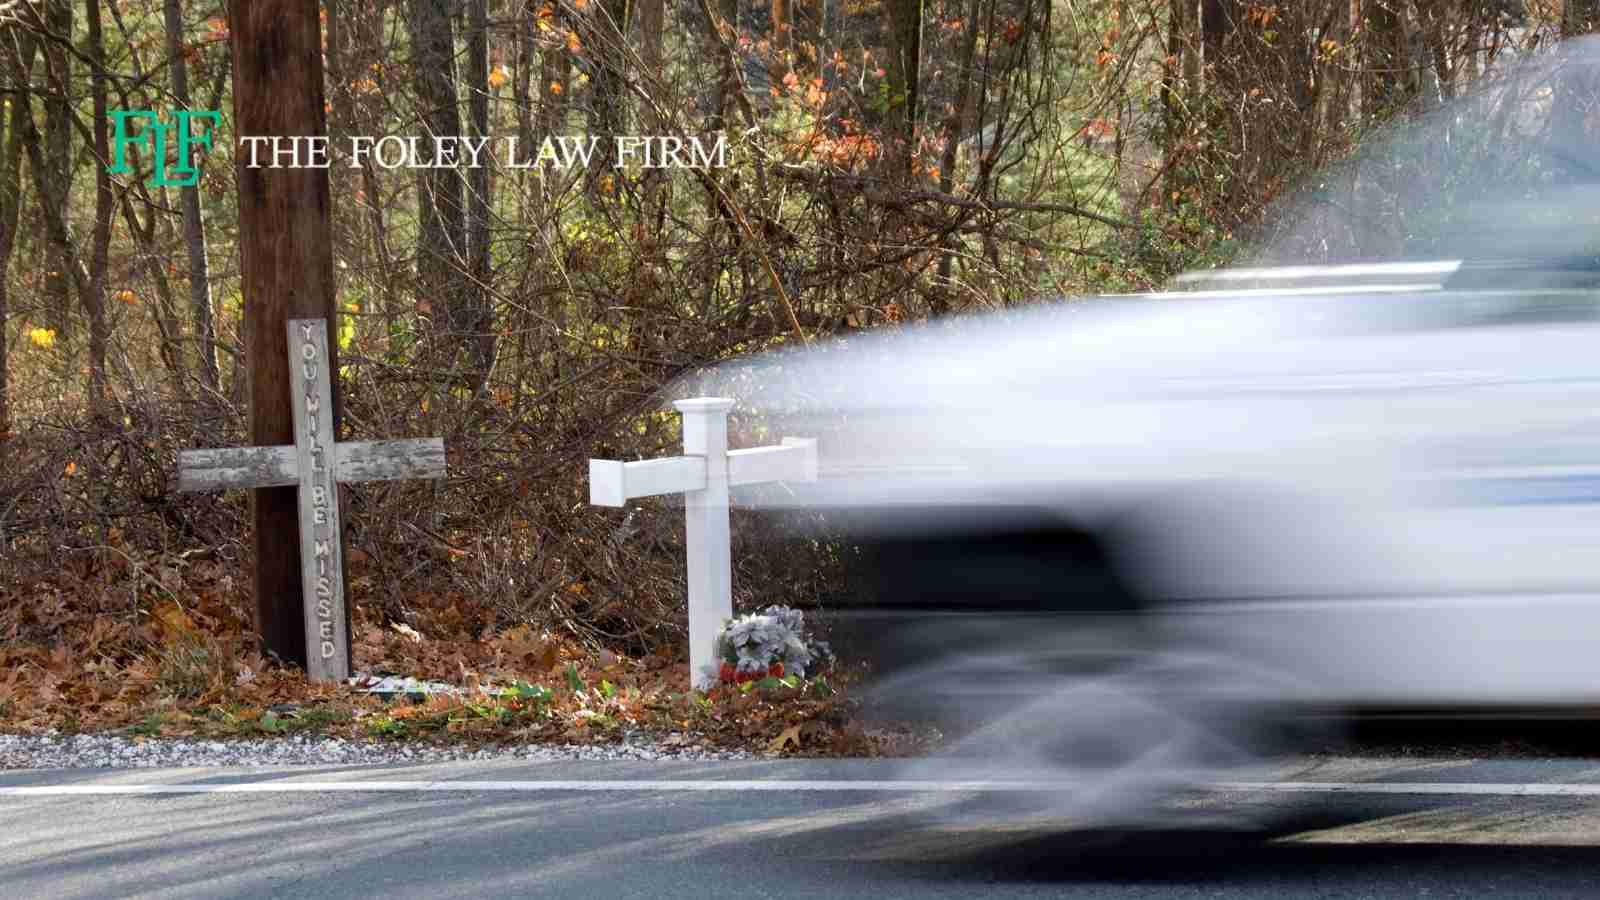 Traffic fatalities labeled a crisis